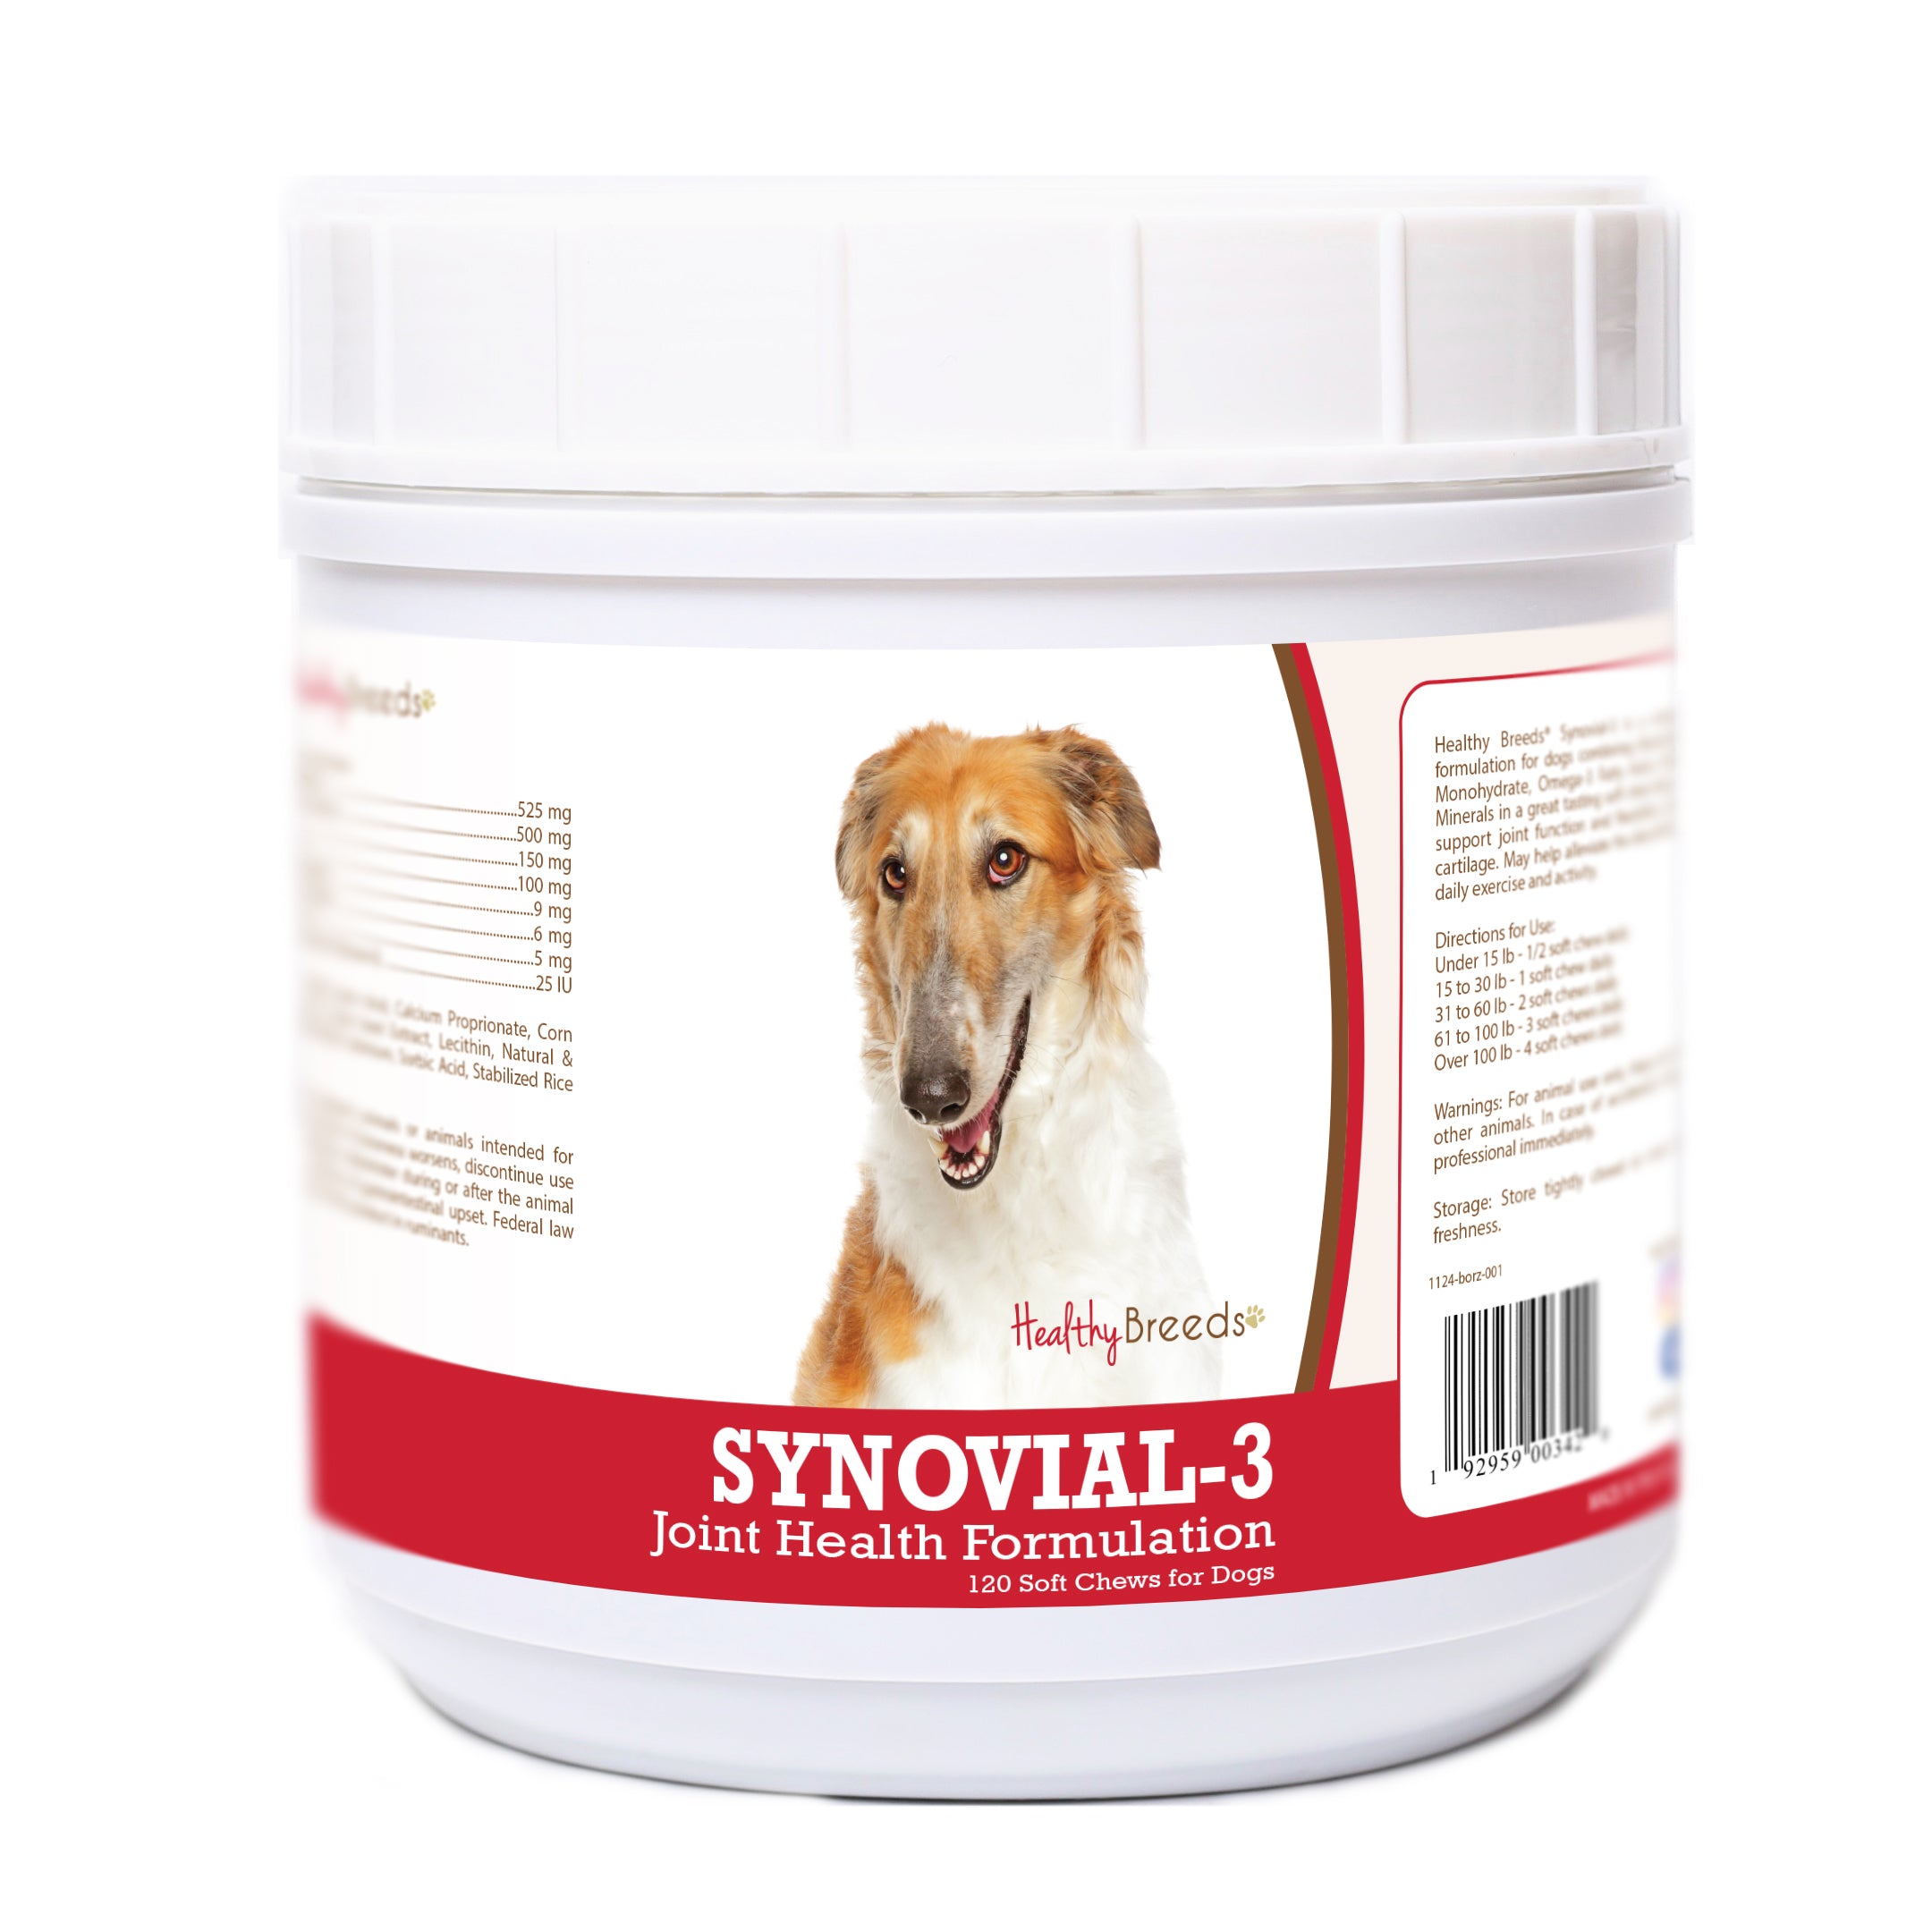 Borzois Synovial-3 Joint Health Formulation Soft Chews 120 Count